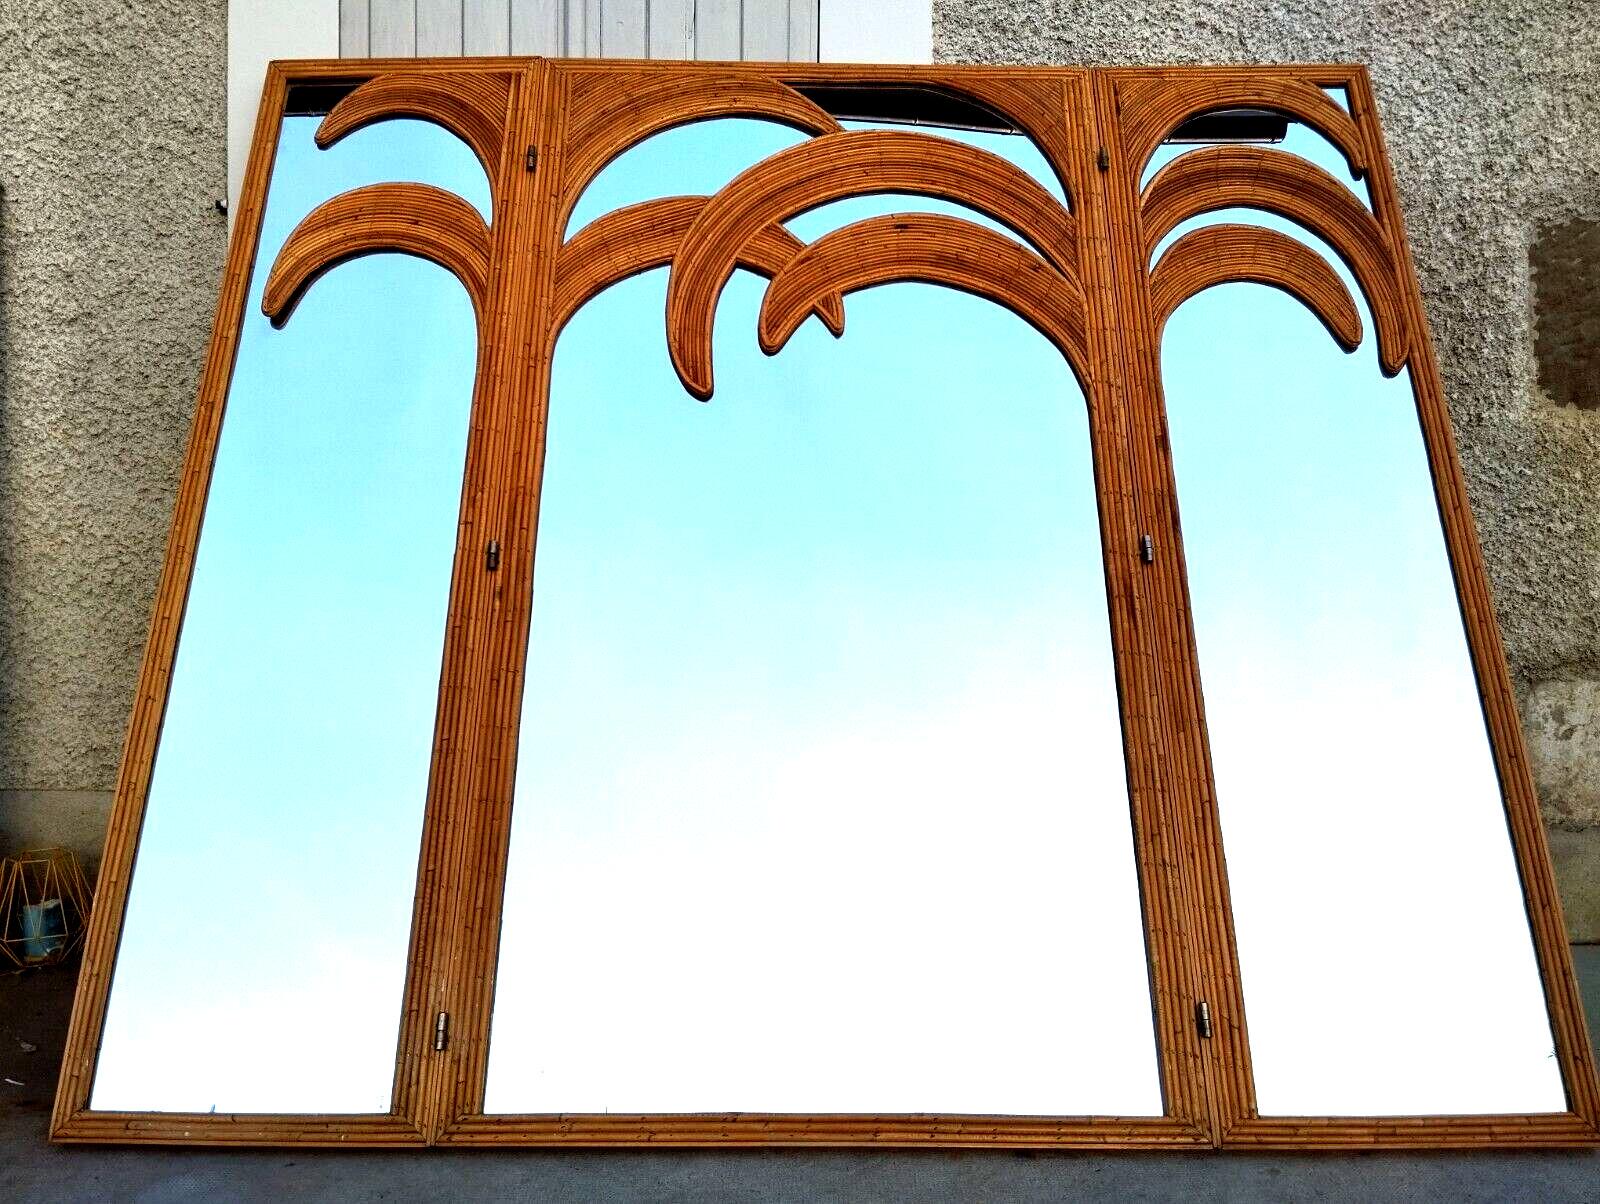 Signed Vivai del Sud Bamboo Palm Trees Mirrored Screen, Italy, 1970s For Sale 5